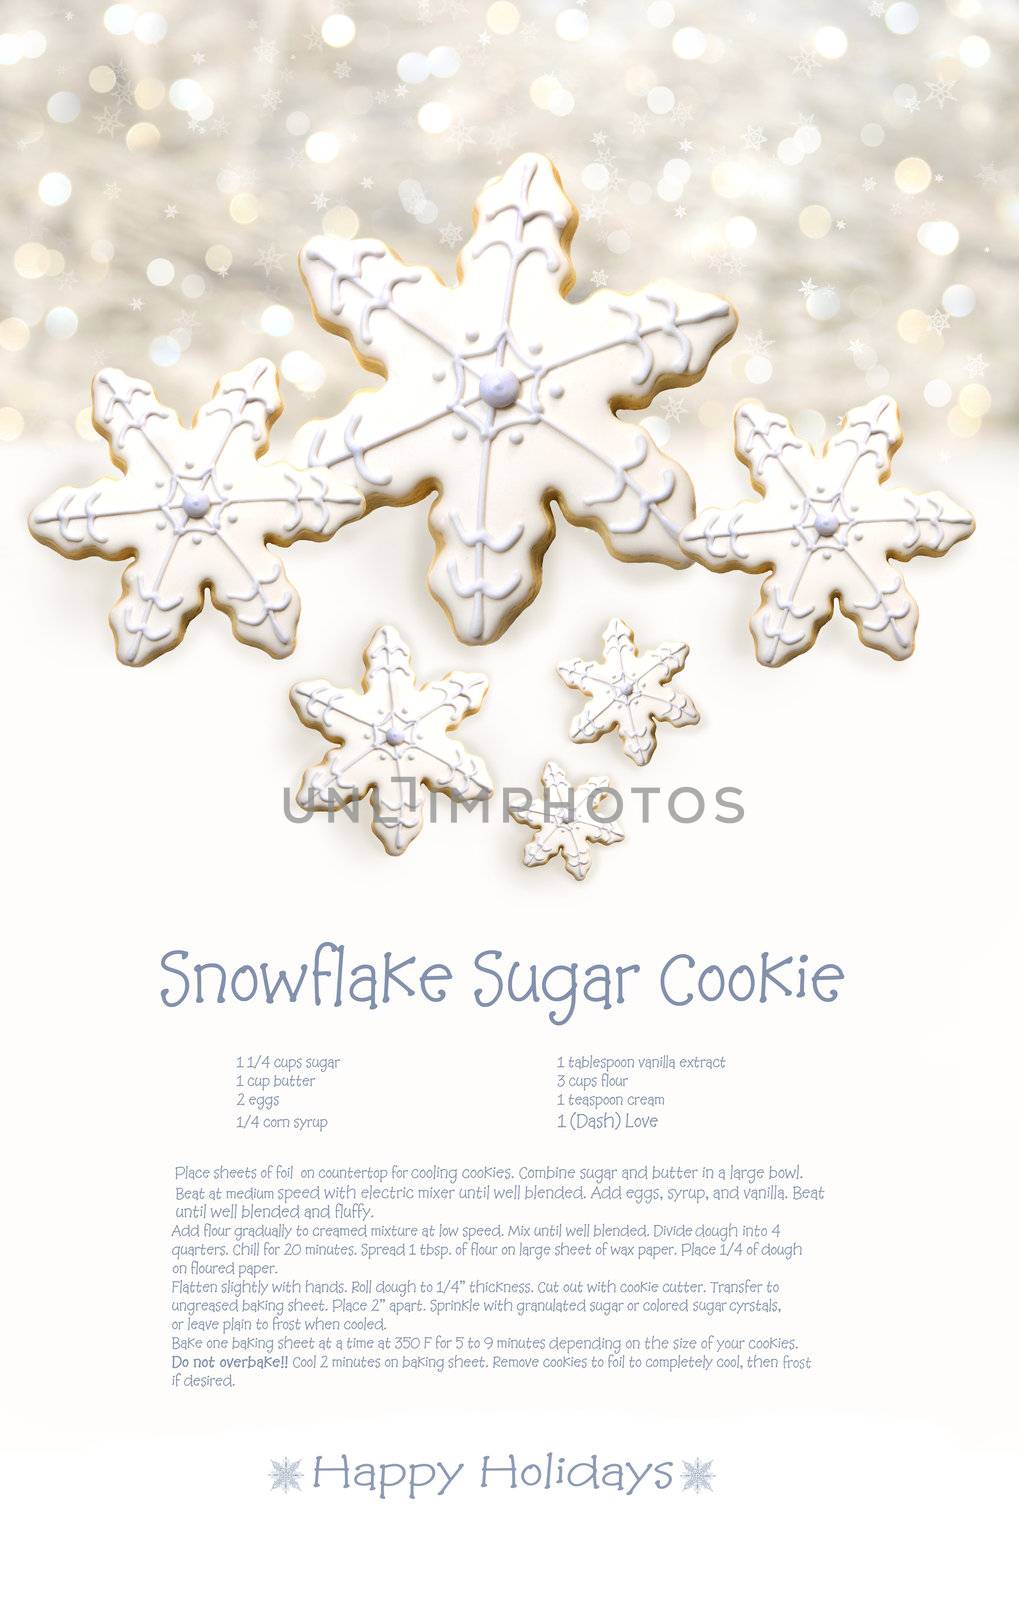 Snowflake sugar cookies with recipe  by Sandralise